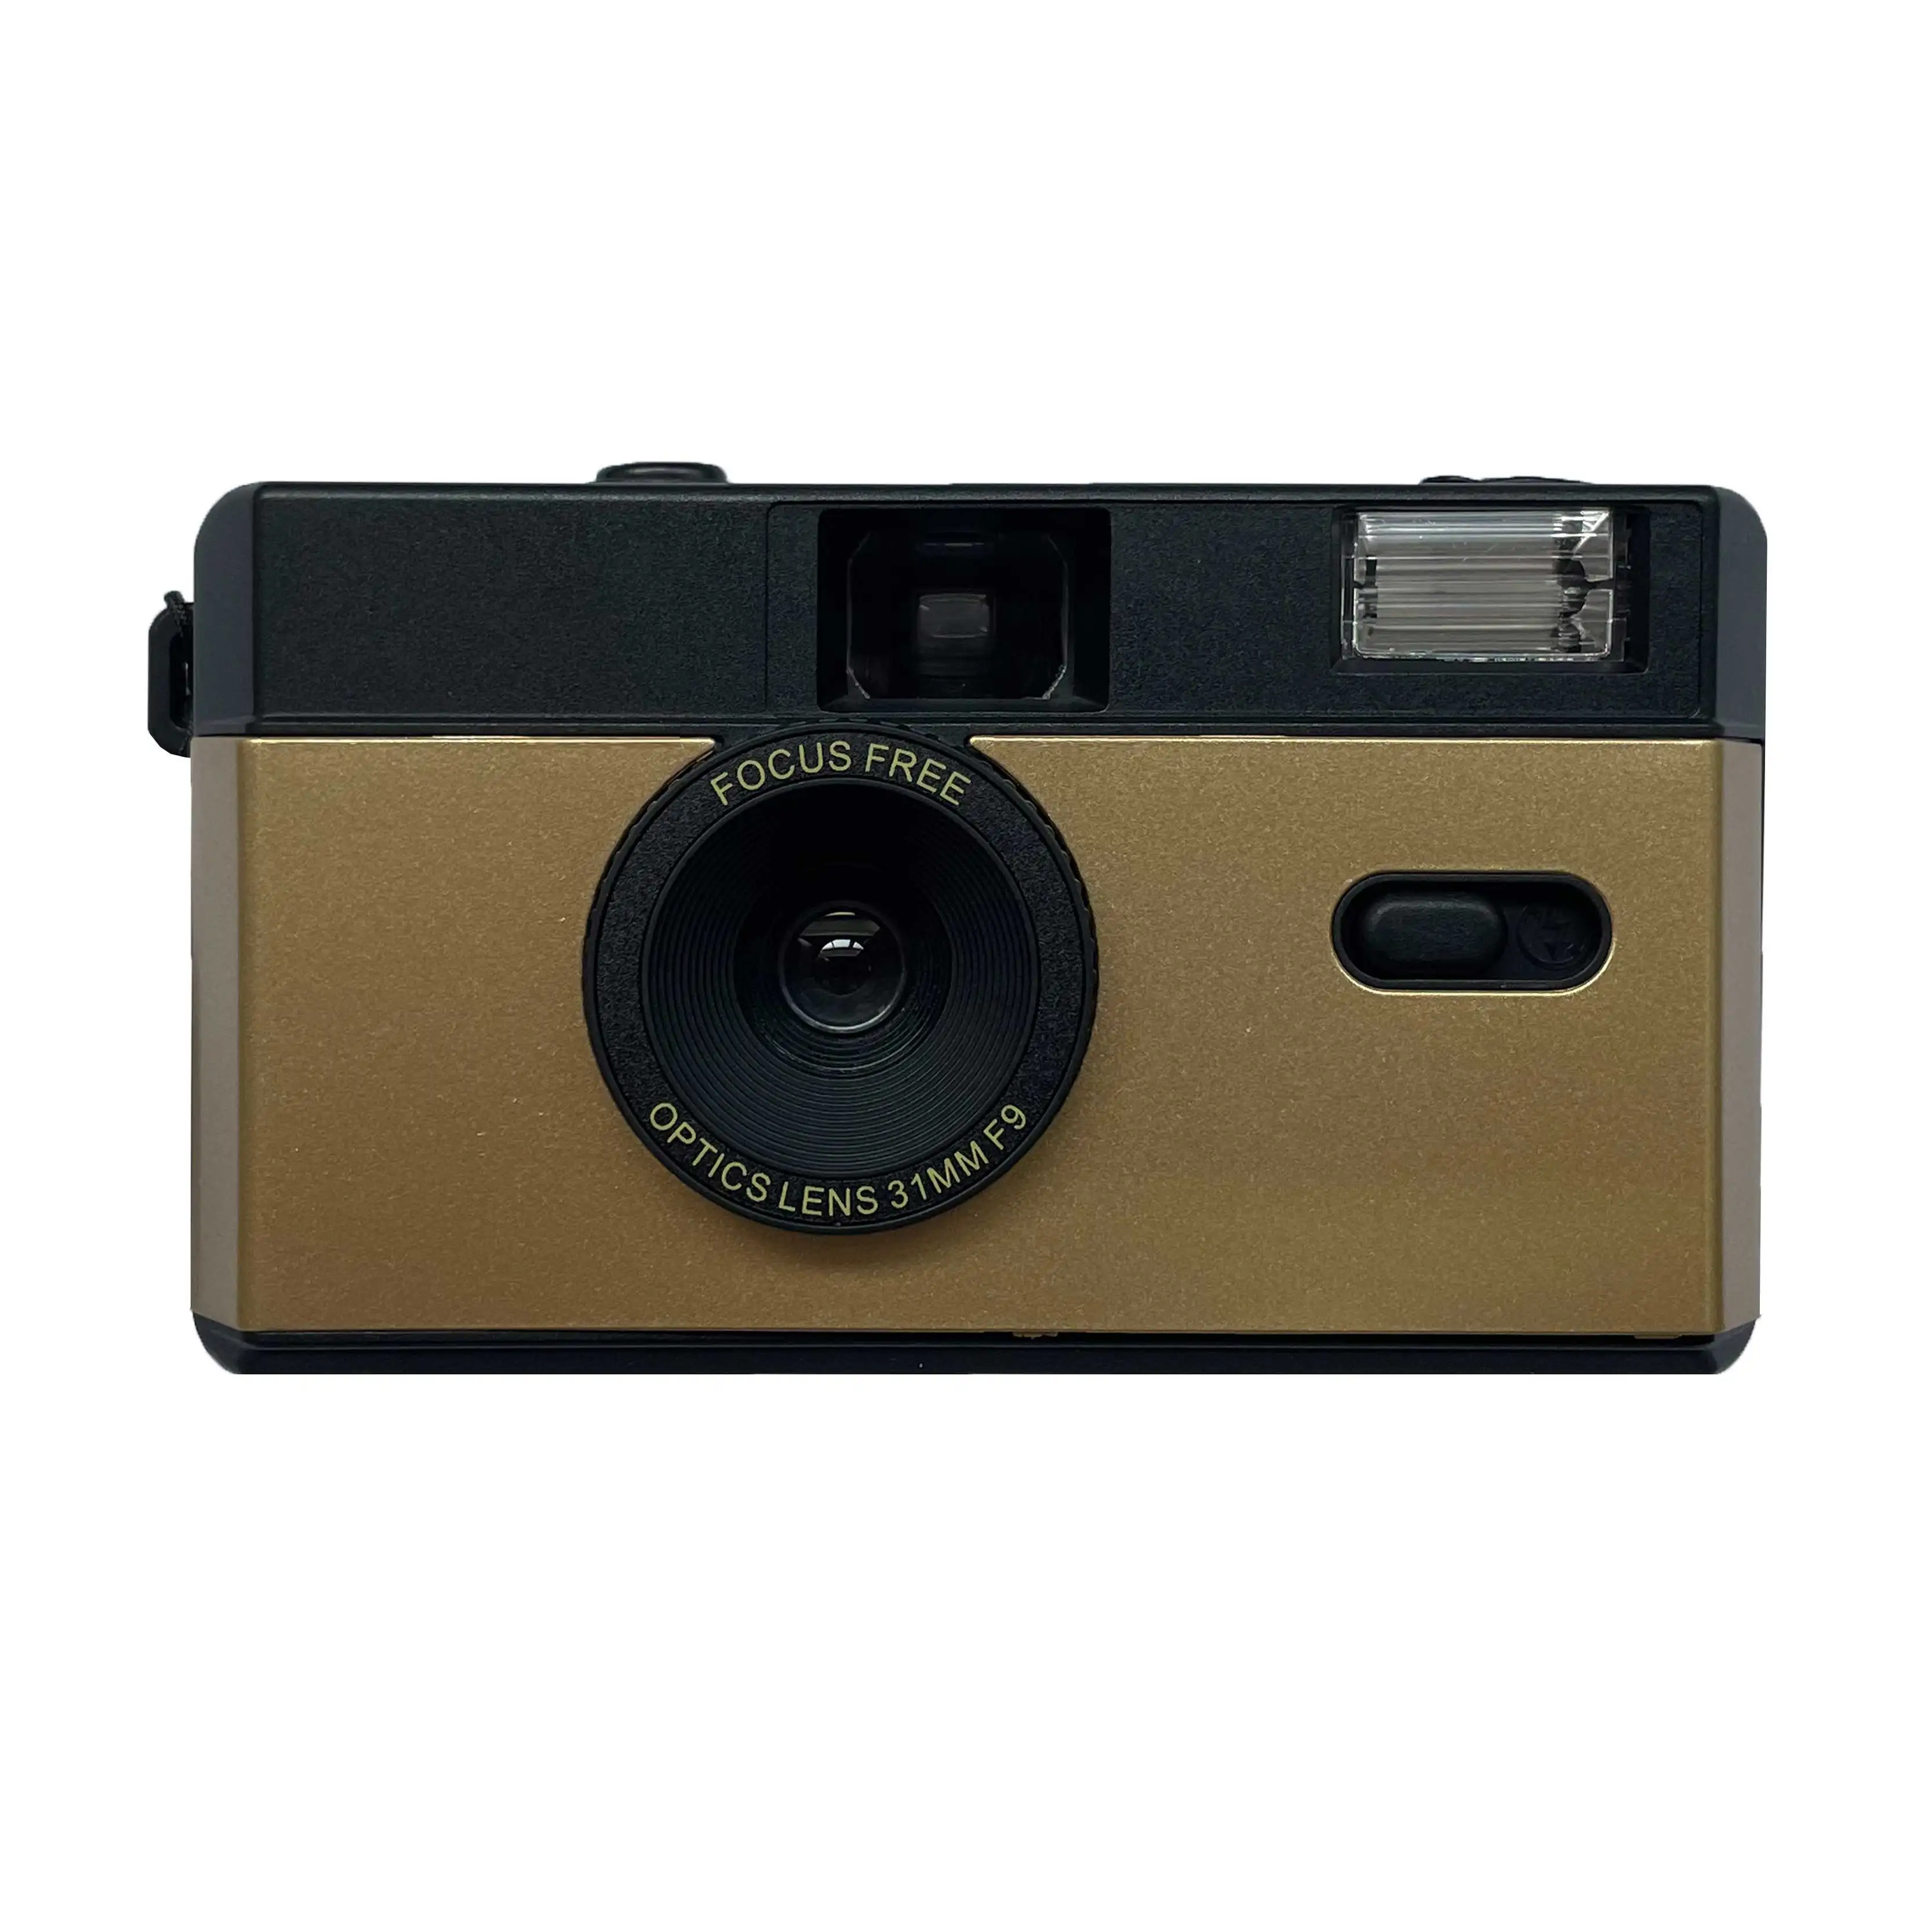 35mm film camera New Design of Retro 35mm Reusable Film Camera with Flash in Different Colors